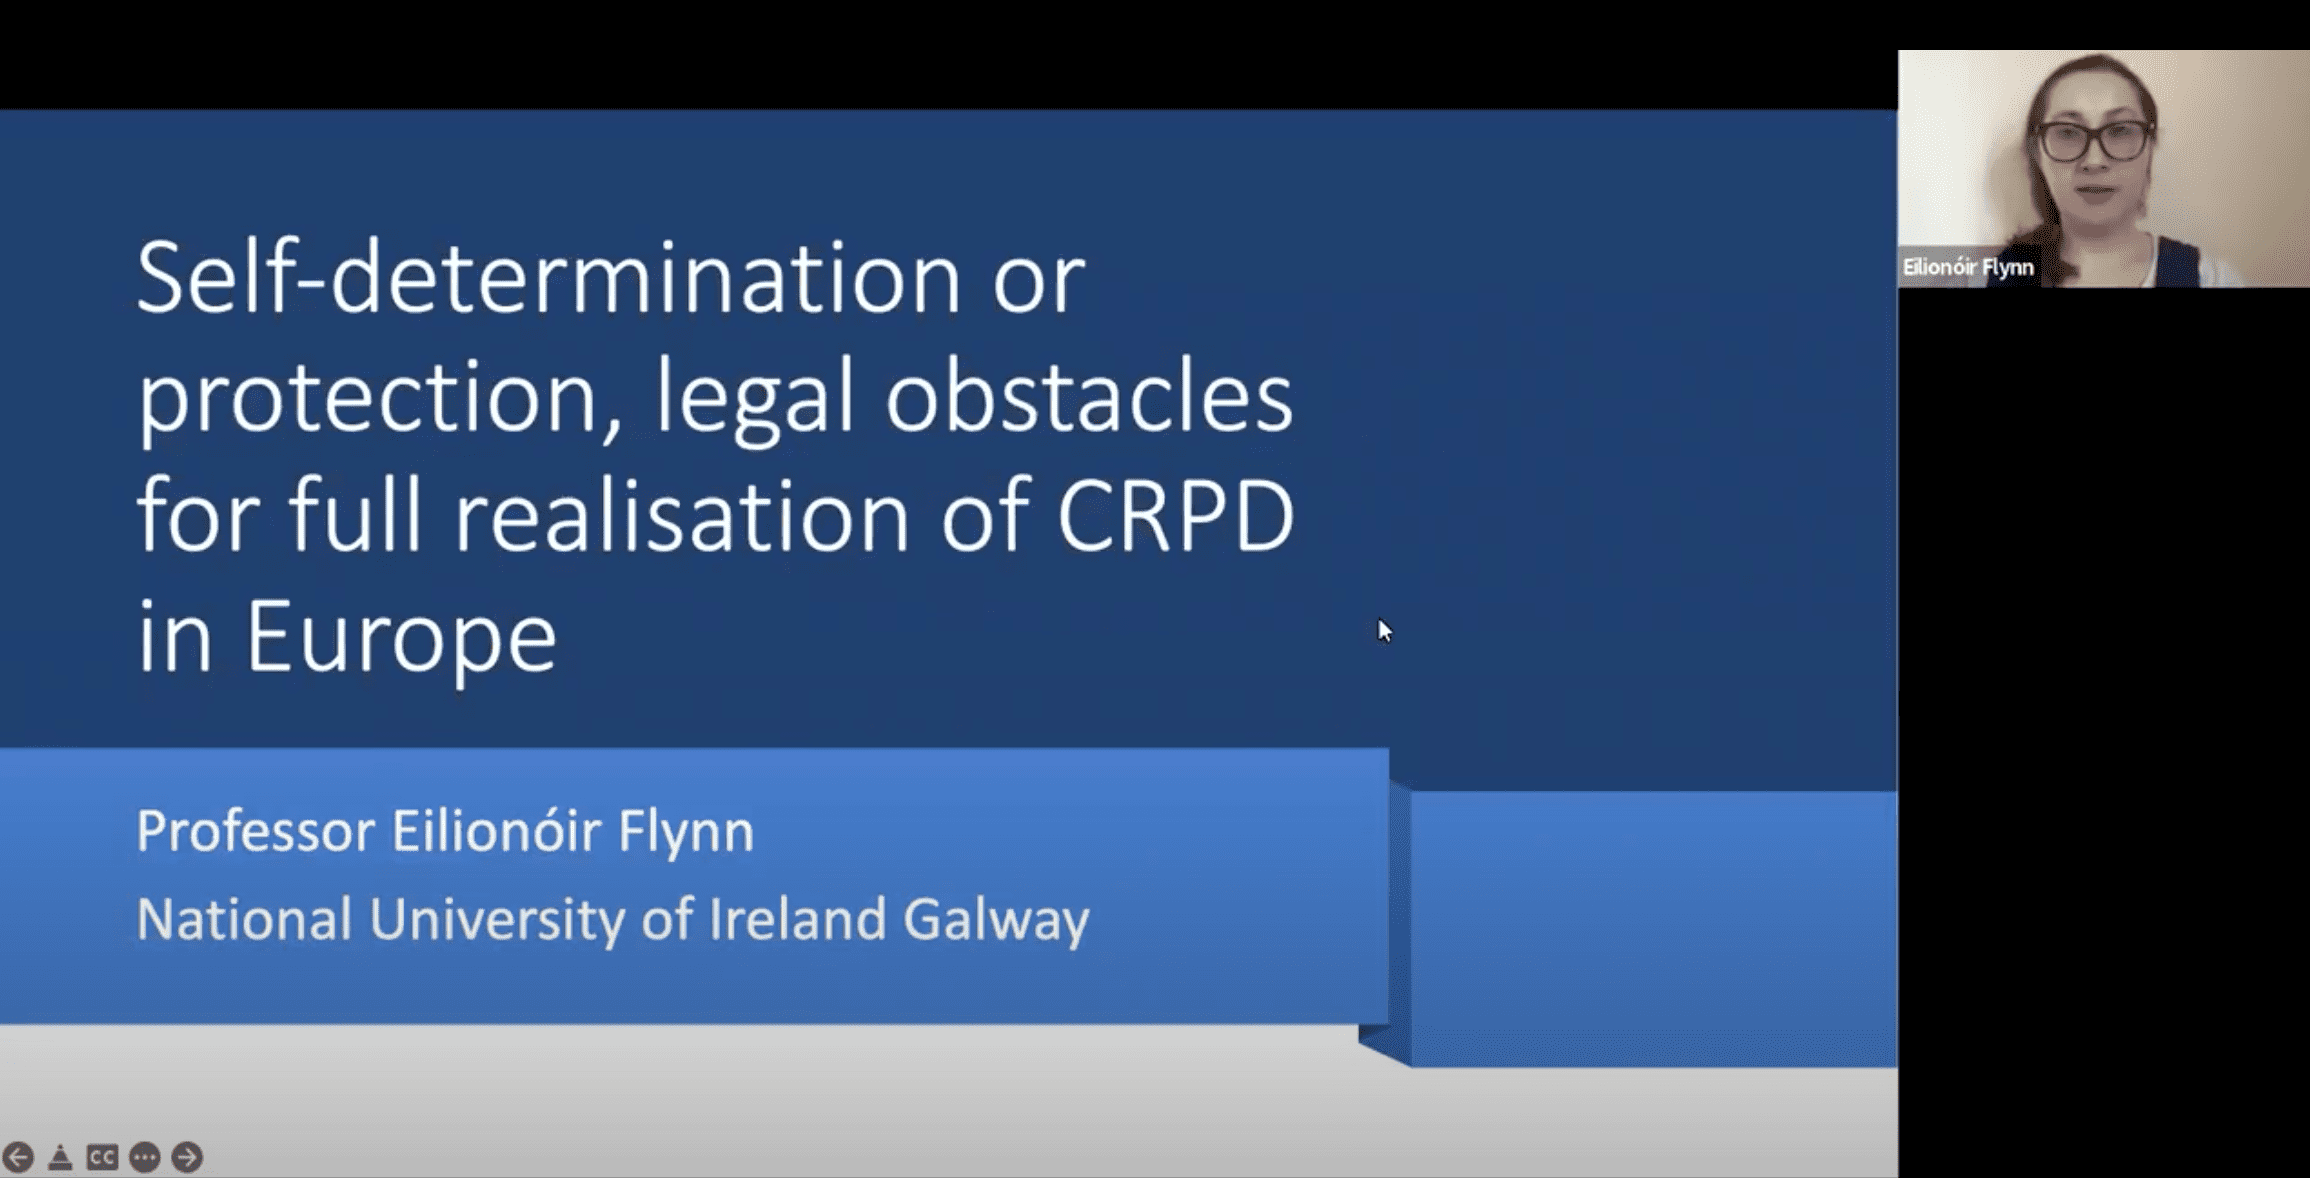 Self-determination or protection, legas obstacles for full realisation of CRPD in Europe. Small portrait of Eilionoir Flynn, National University of Ireland Galway